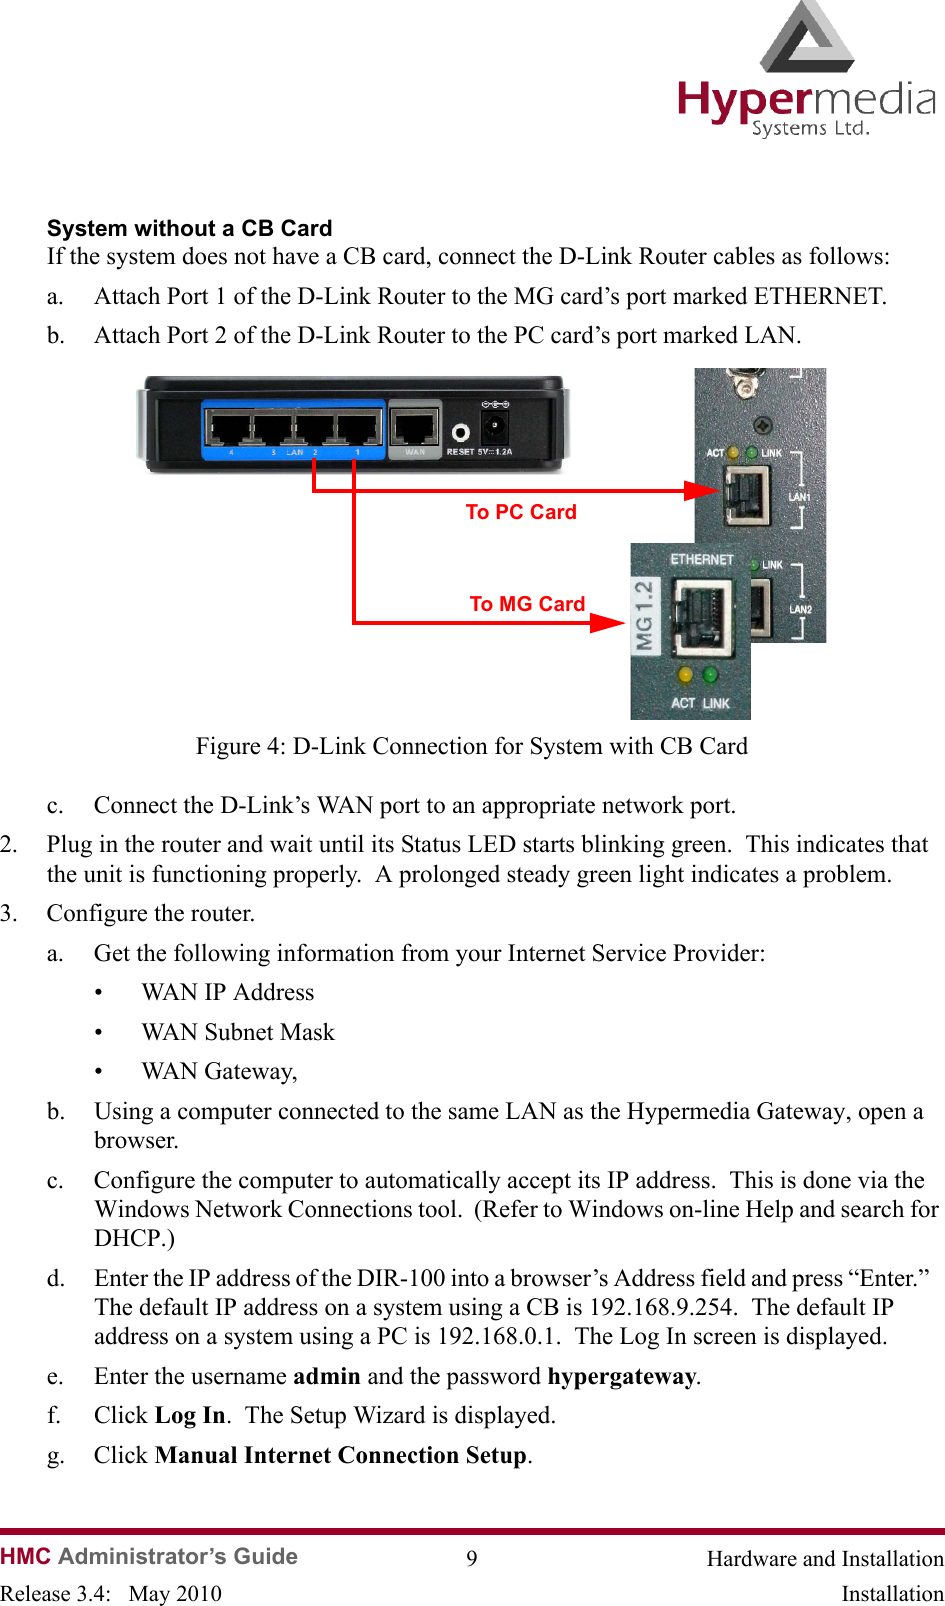 HMC Administrator’s Guide 9 Hardware and InstallationRelease 3.4:   May 2010 InstallationSystem without a CB CardIf the system does not have a CB card, connect the D-Link Router cables as follows:a. Attach Port 1 of the D-Link Router to the MG card’s port marked ETHERNET.  b. Attach Port 2 of the D-Link Router to the PC card’s port marked LAN.                Figure 4: D-Link Connection for System with CB Cardc. Connect the D-Link’s WAN port to an appropriate network port.2. Plug in the router and wait until its Status LED starts blinking green.  This indicates that  the unit is functioning properly.  A prolonged steady green light indicates a problem. 3. Configure the router.a. Get the following information from your Internet Service Provider:• WAN IP Address• WAN Subnet Mask• WAN Gateway,b. Using a computer connected to the same LAN as the Hypermedia Gateway, open a browser. c. Configure the computer to automatically accept its IP address.  This is done via the Windows Network Connections tool.  (Refer to Windows on-line Help and search for DHCP.)d. Enter the IP address of the DIR-100 into a browser’s Address field and press “Enter.”   The default IP address on a system using a CB is 192.168.9.254.  The default IP address on a system using a PC is 192.168.0.1.  The Log In screen is displayed. e. Enter the username admin and the password hypergateway. f. Click Log In.  The Setup Wizard is displayed.g. Click Manual Internet Connection Setup.  To PC CardTo MG Card